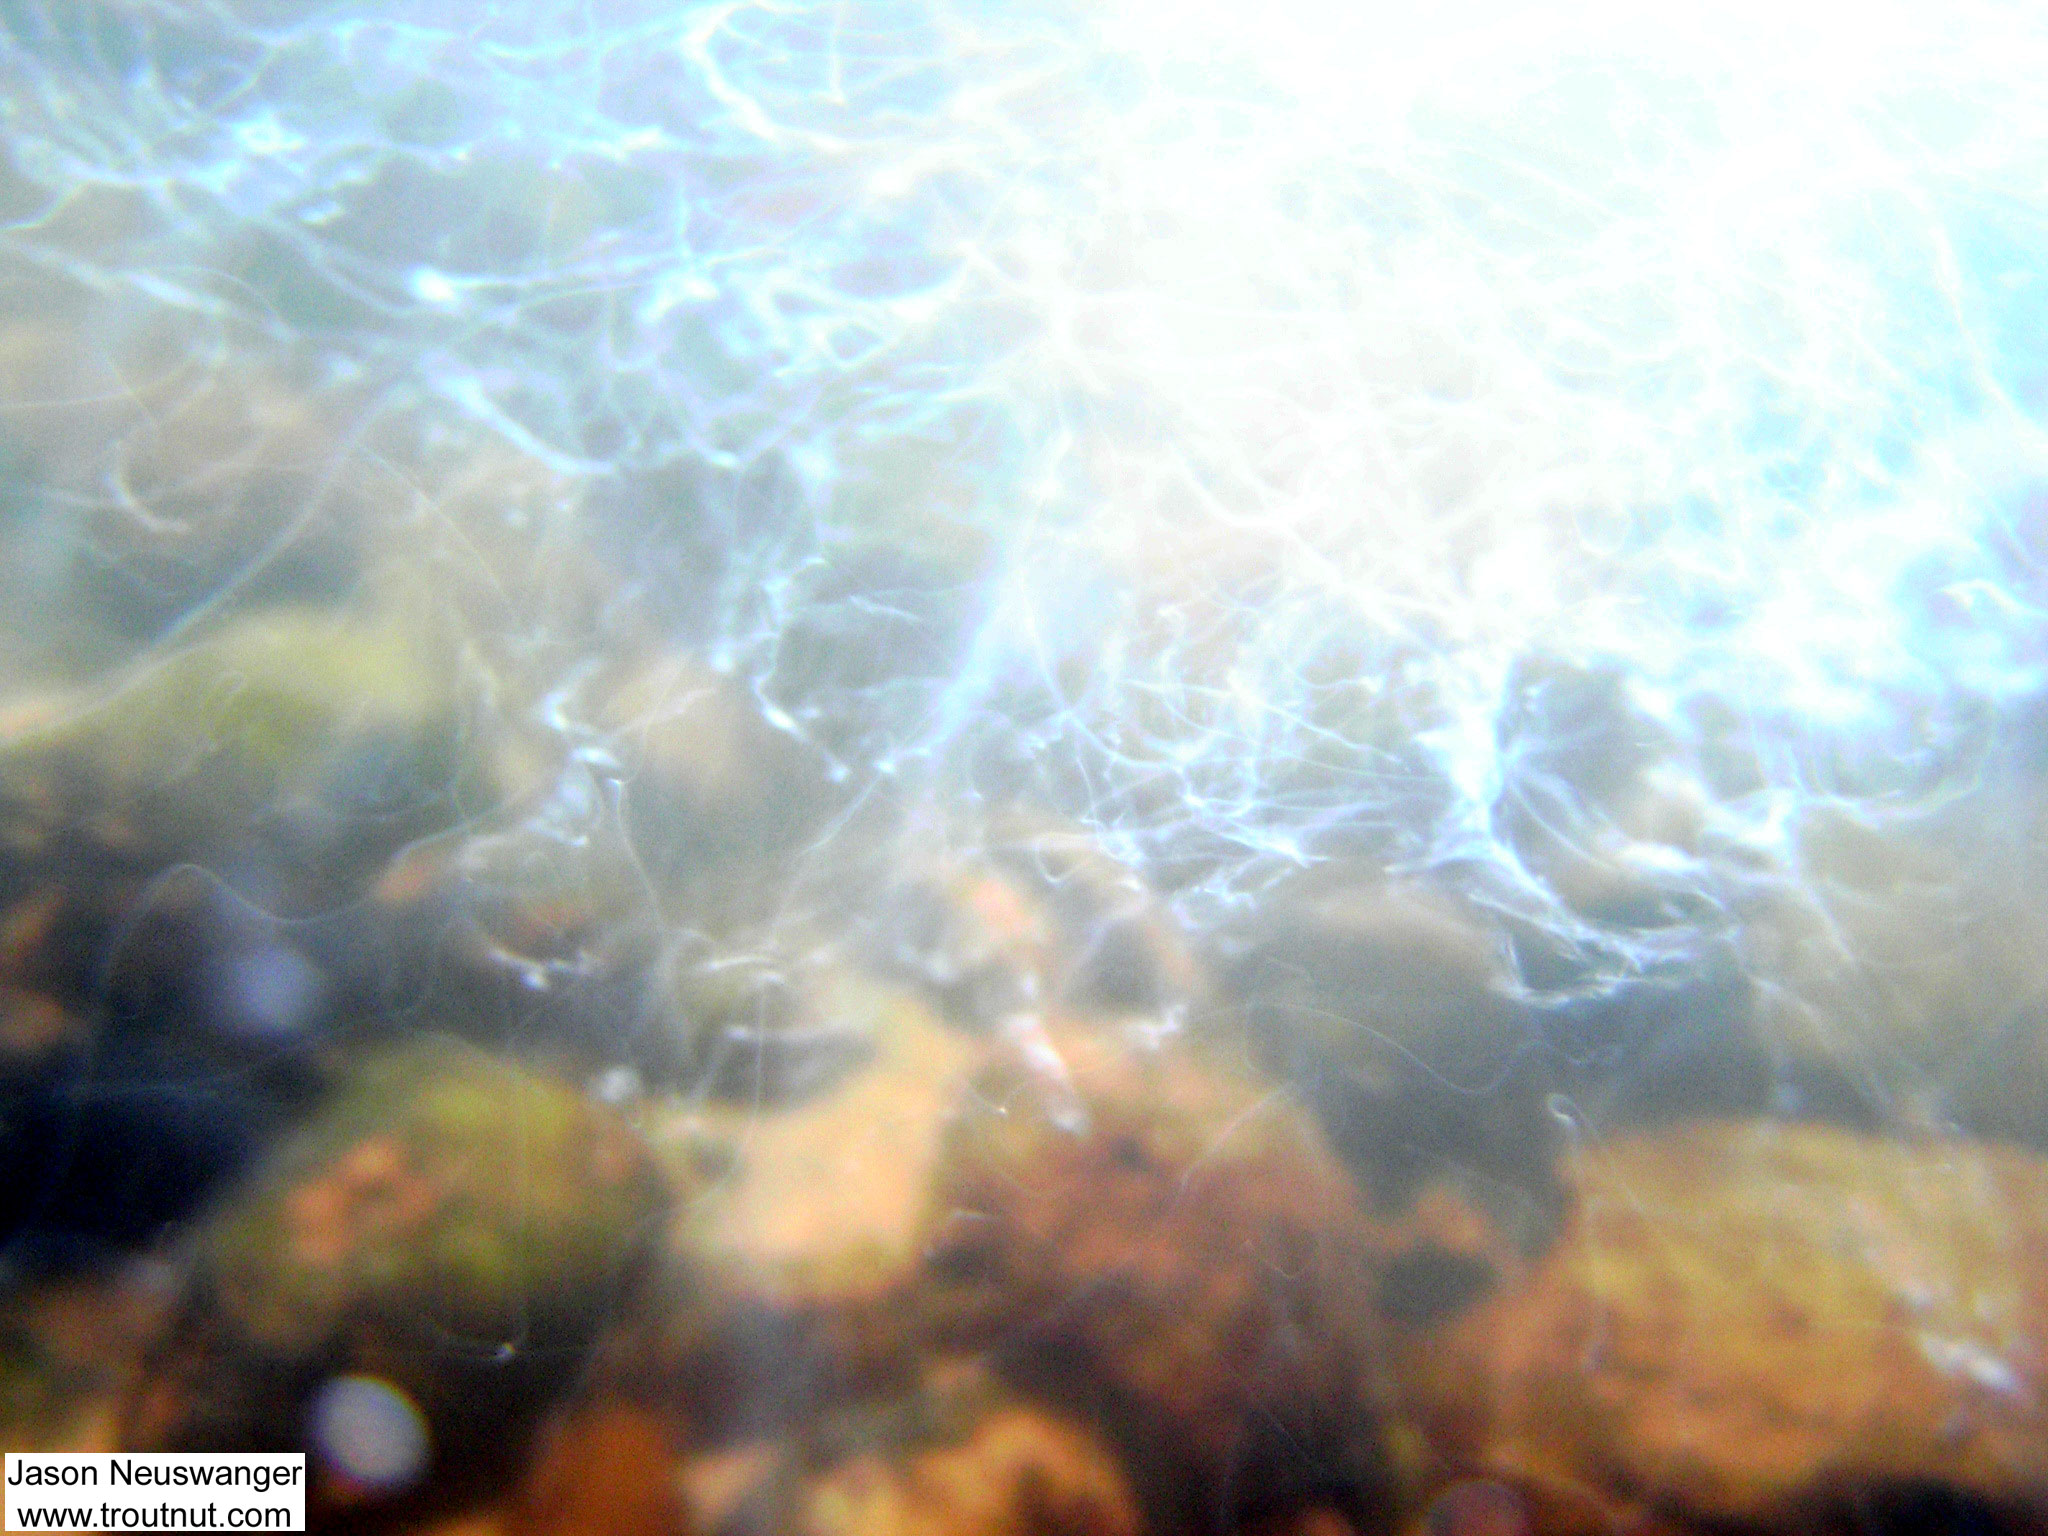 Light reflected from air bubbles left ghostly wisps in this fairly long exposure picture beneath a riffle.  It's got an accidental artistic look. From Eighteenmile Creek in Wisconsin.